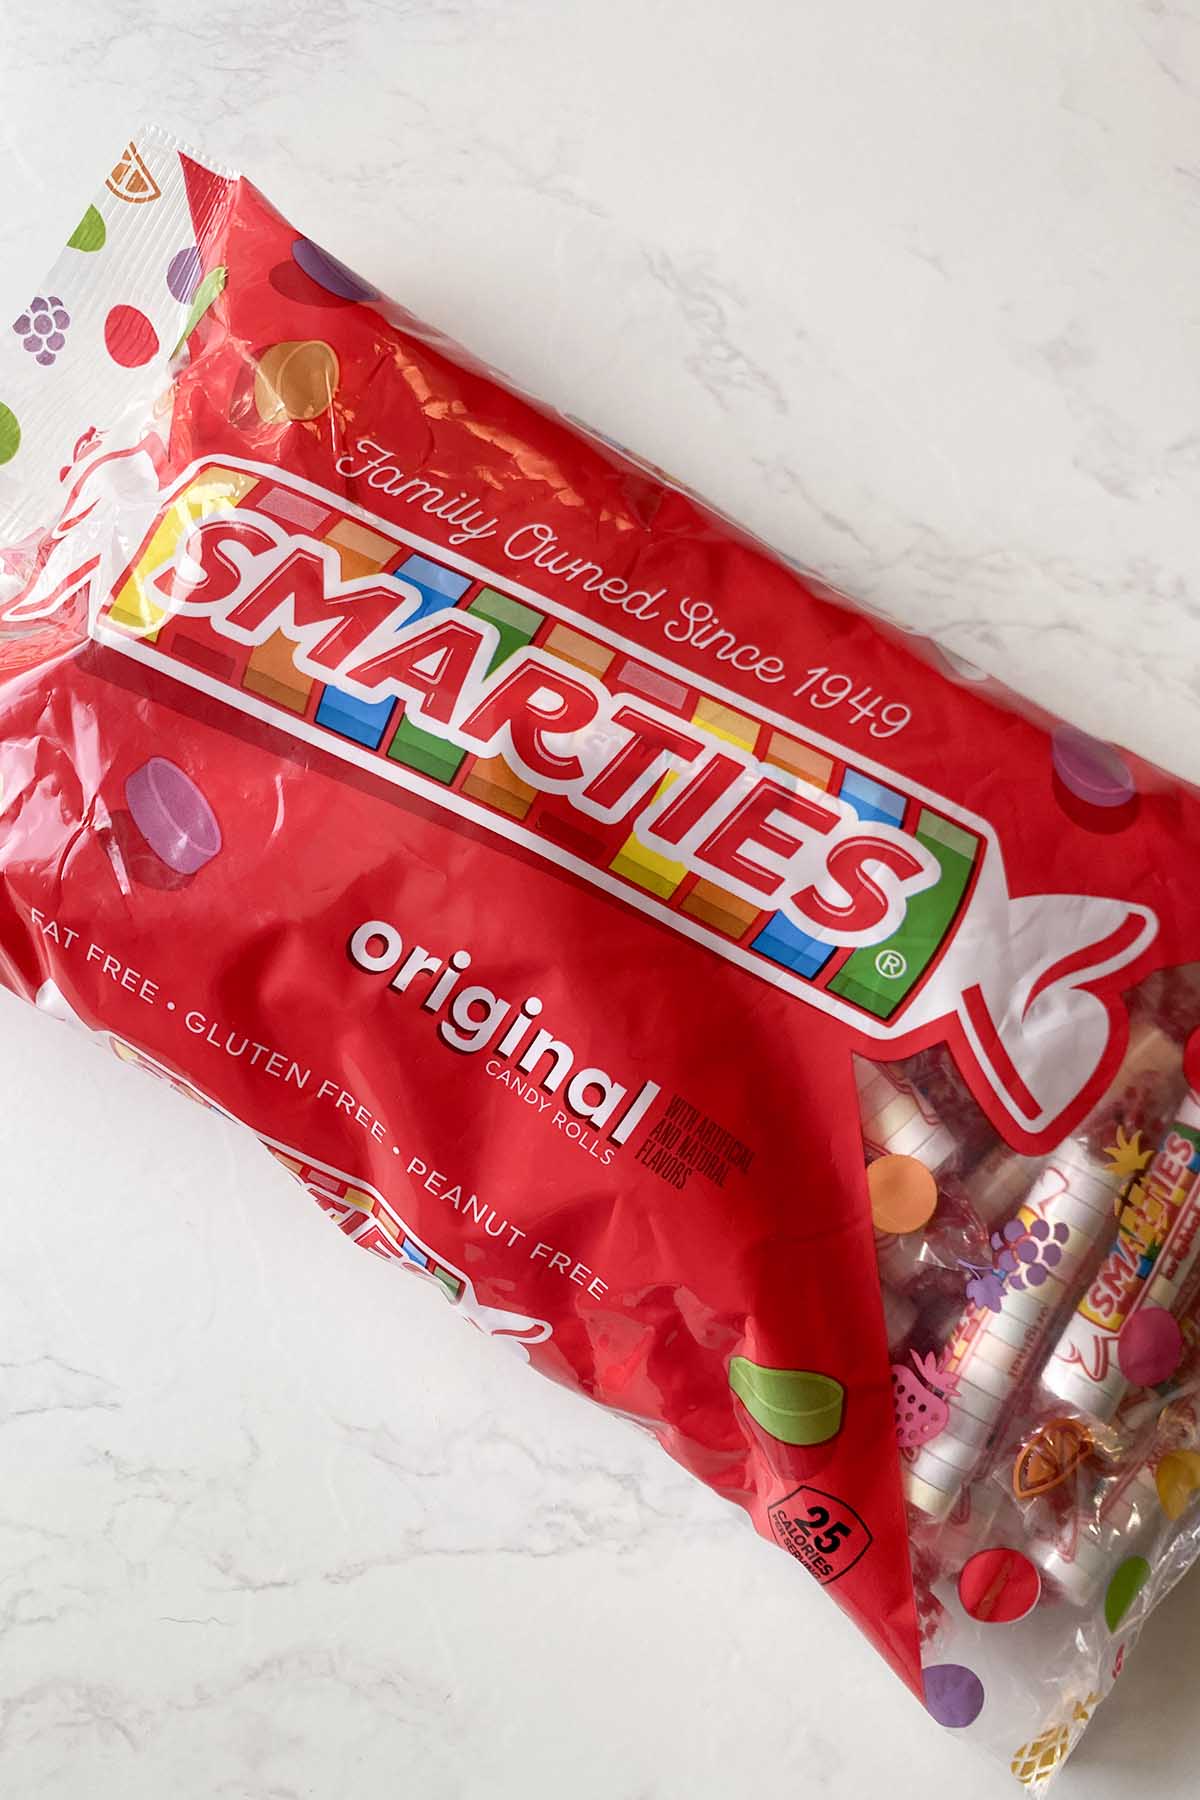 bag of Smarties on a white table